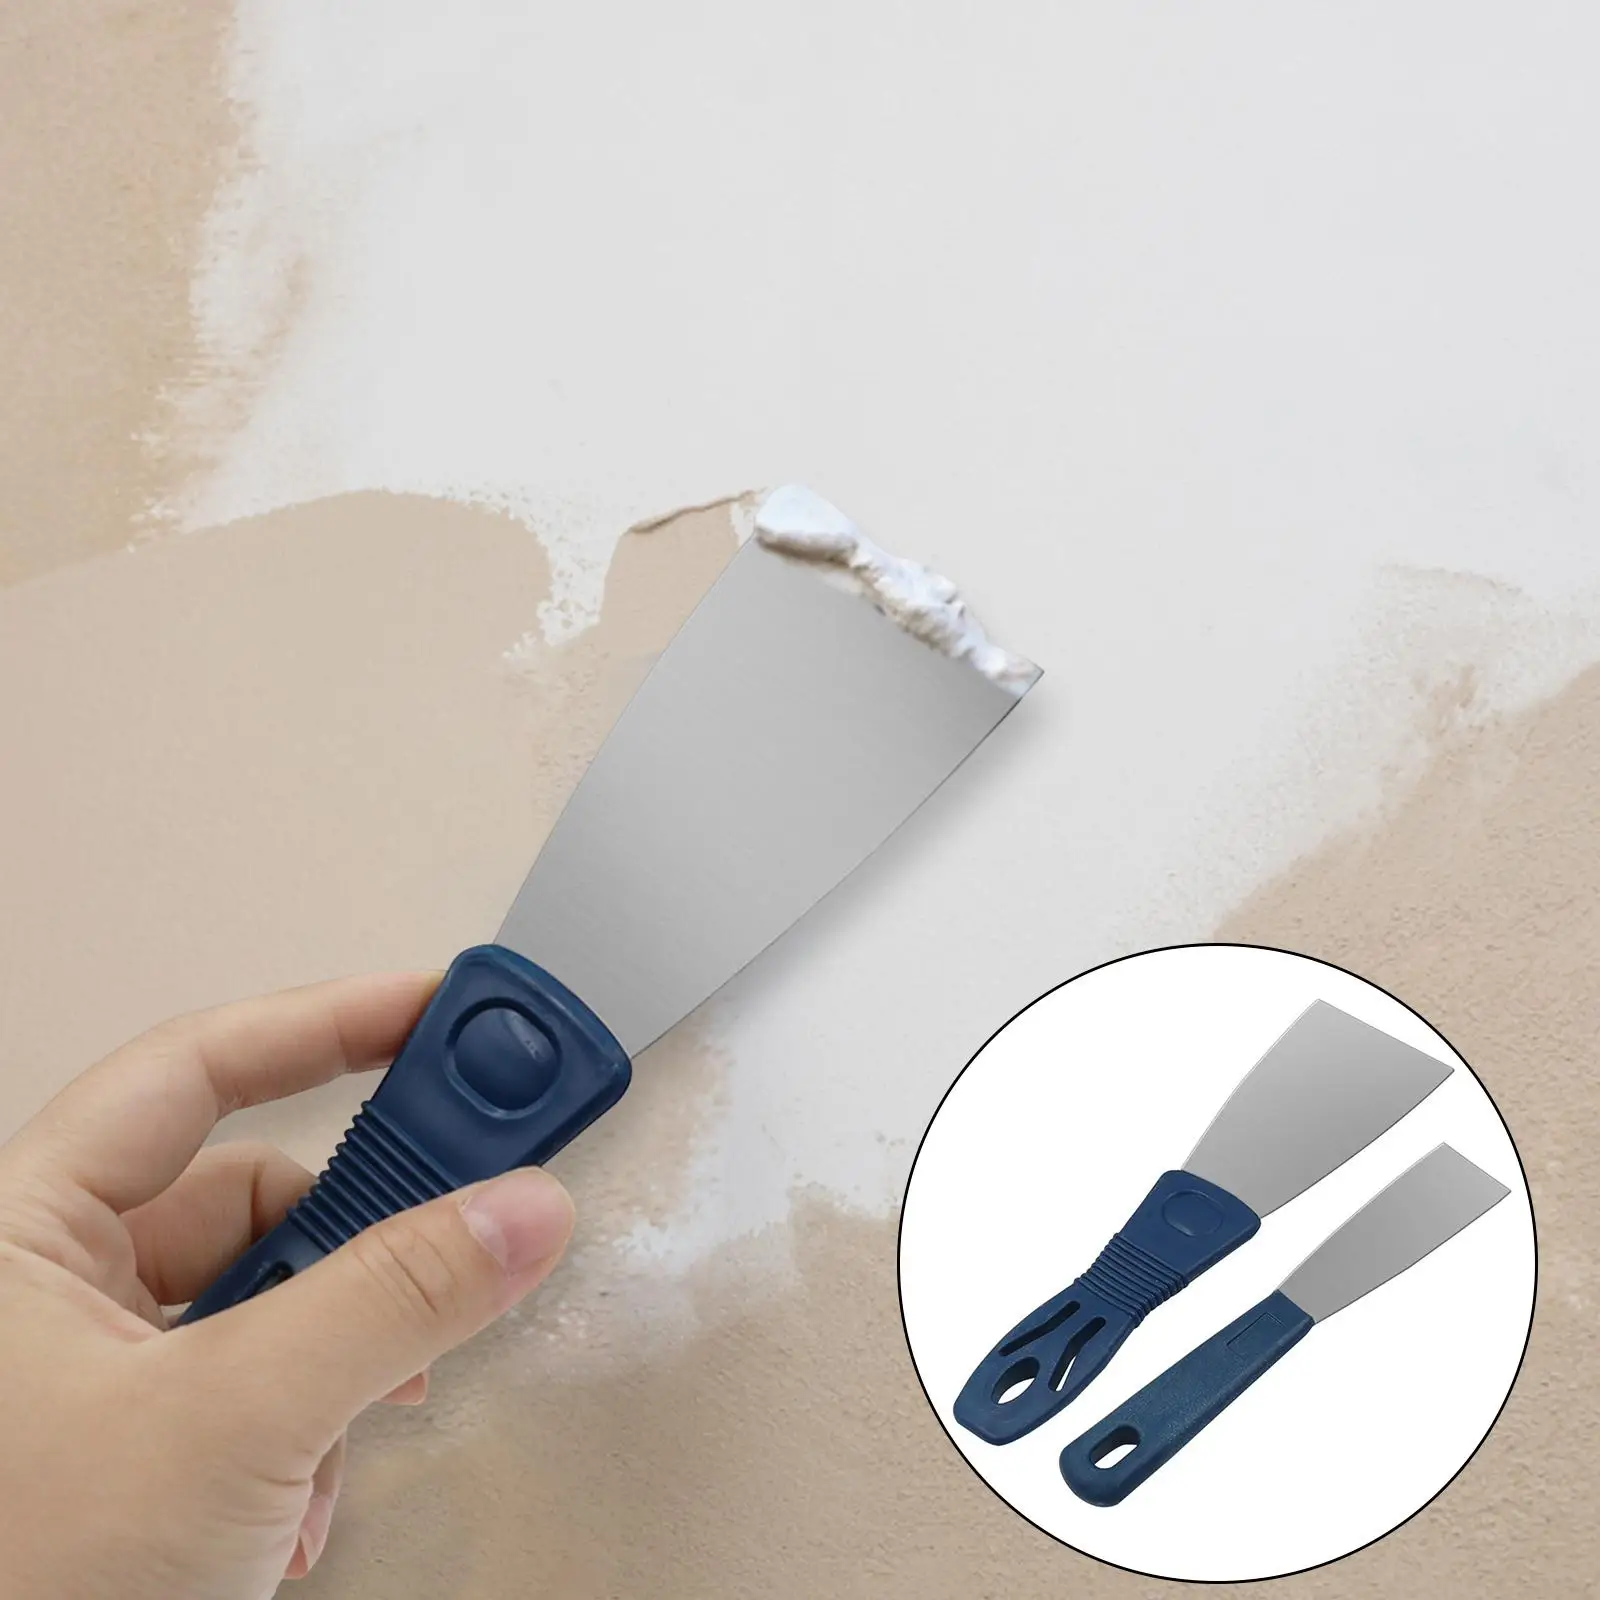 2Pcs Putty Tool Set High Carbon Steel Flexible Hand Tool for Wall Decoration Removing Wallpaper Plaster Scraping